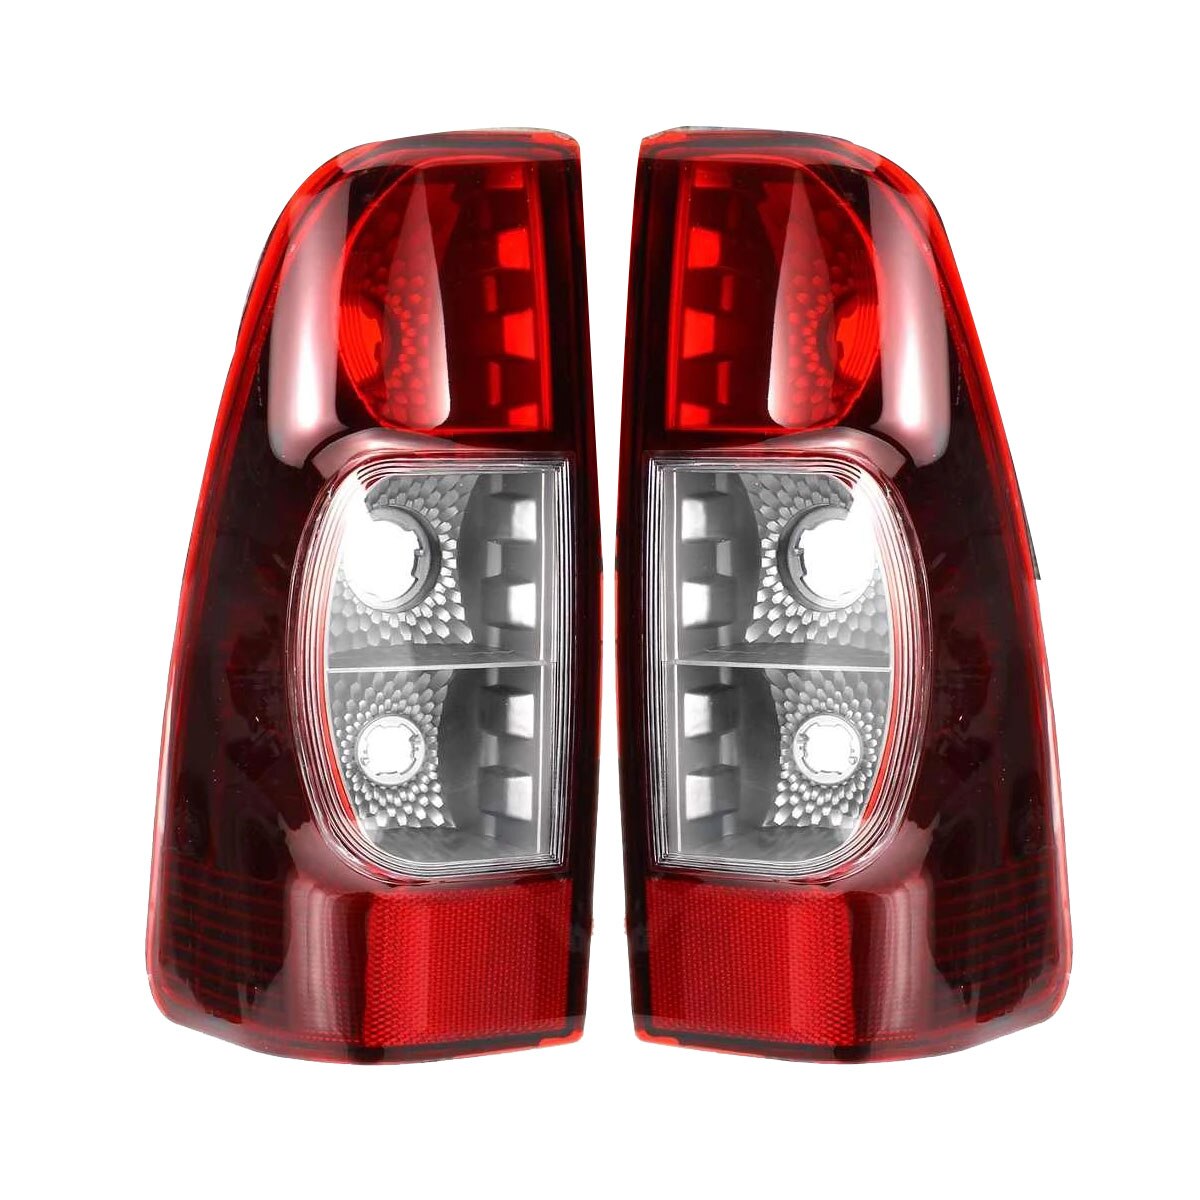 2Pcs Car Rear Taillight Brake Lamp Tail Lamp Without Bulb for DMax Pickup